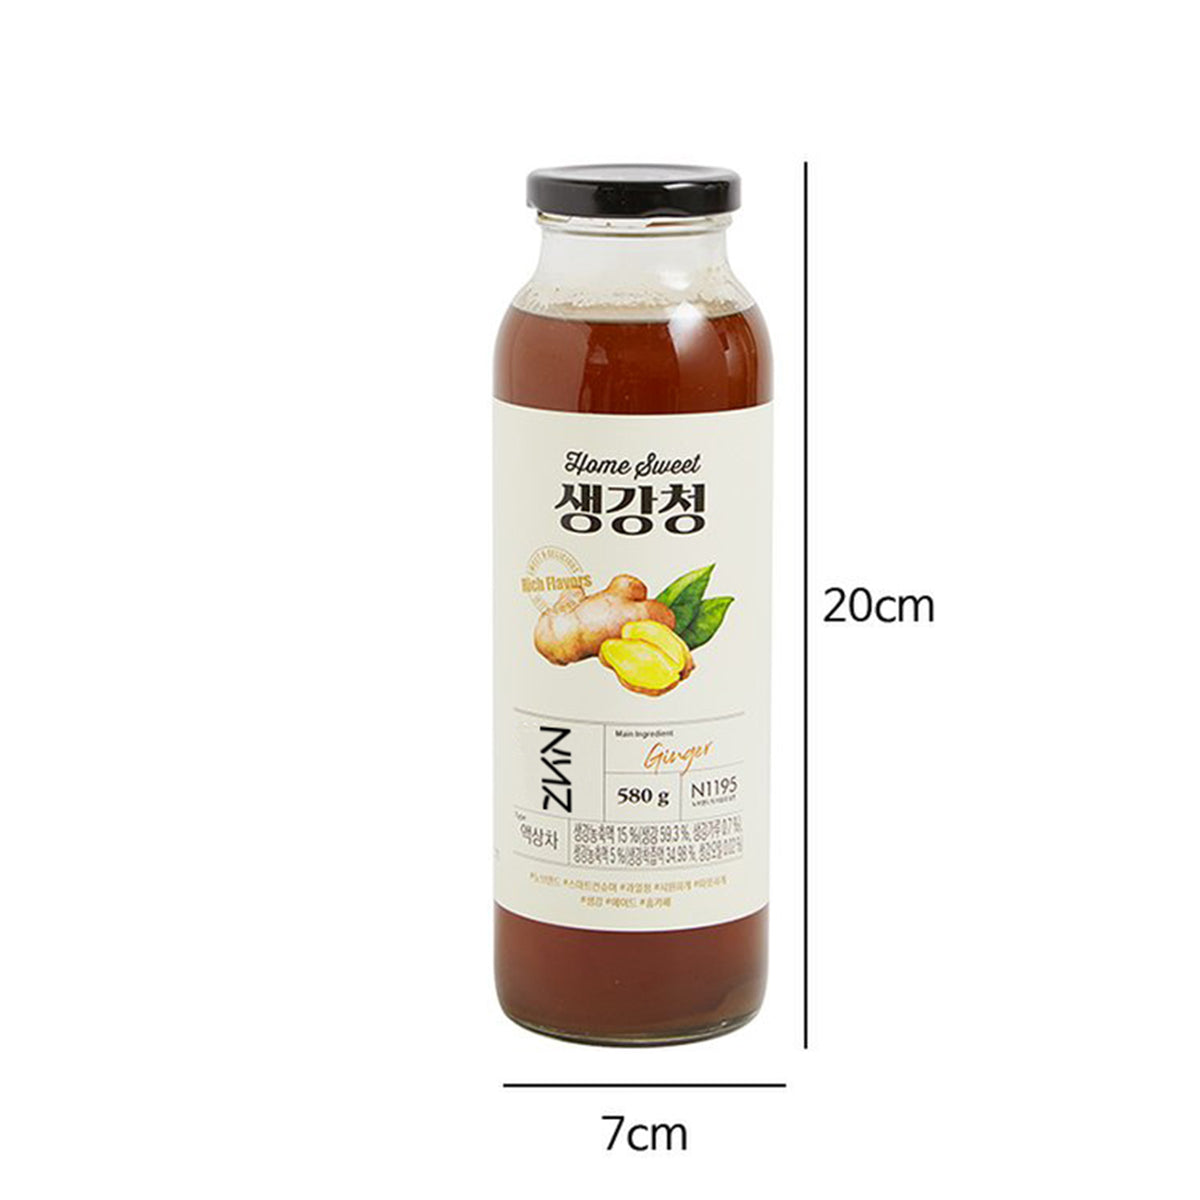 Ginger Flavor Syrup, 20.45 oz(580g), Makes a Refreshing Cool Drink Including Fruit Drinks, Smoothies, Juice, Soda, Iced tea & More